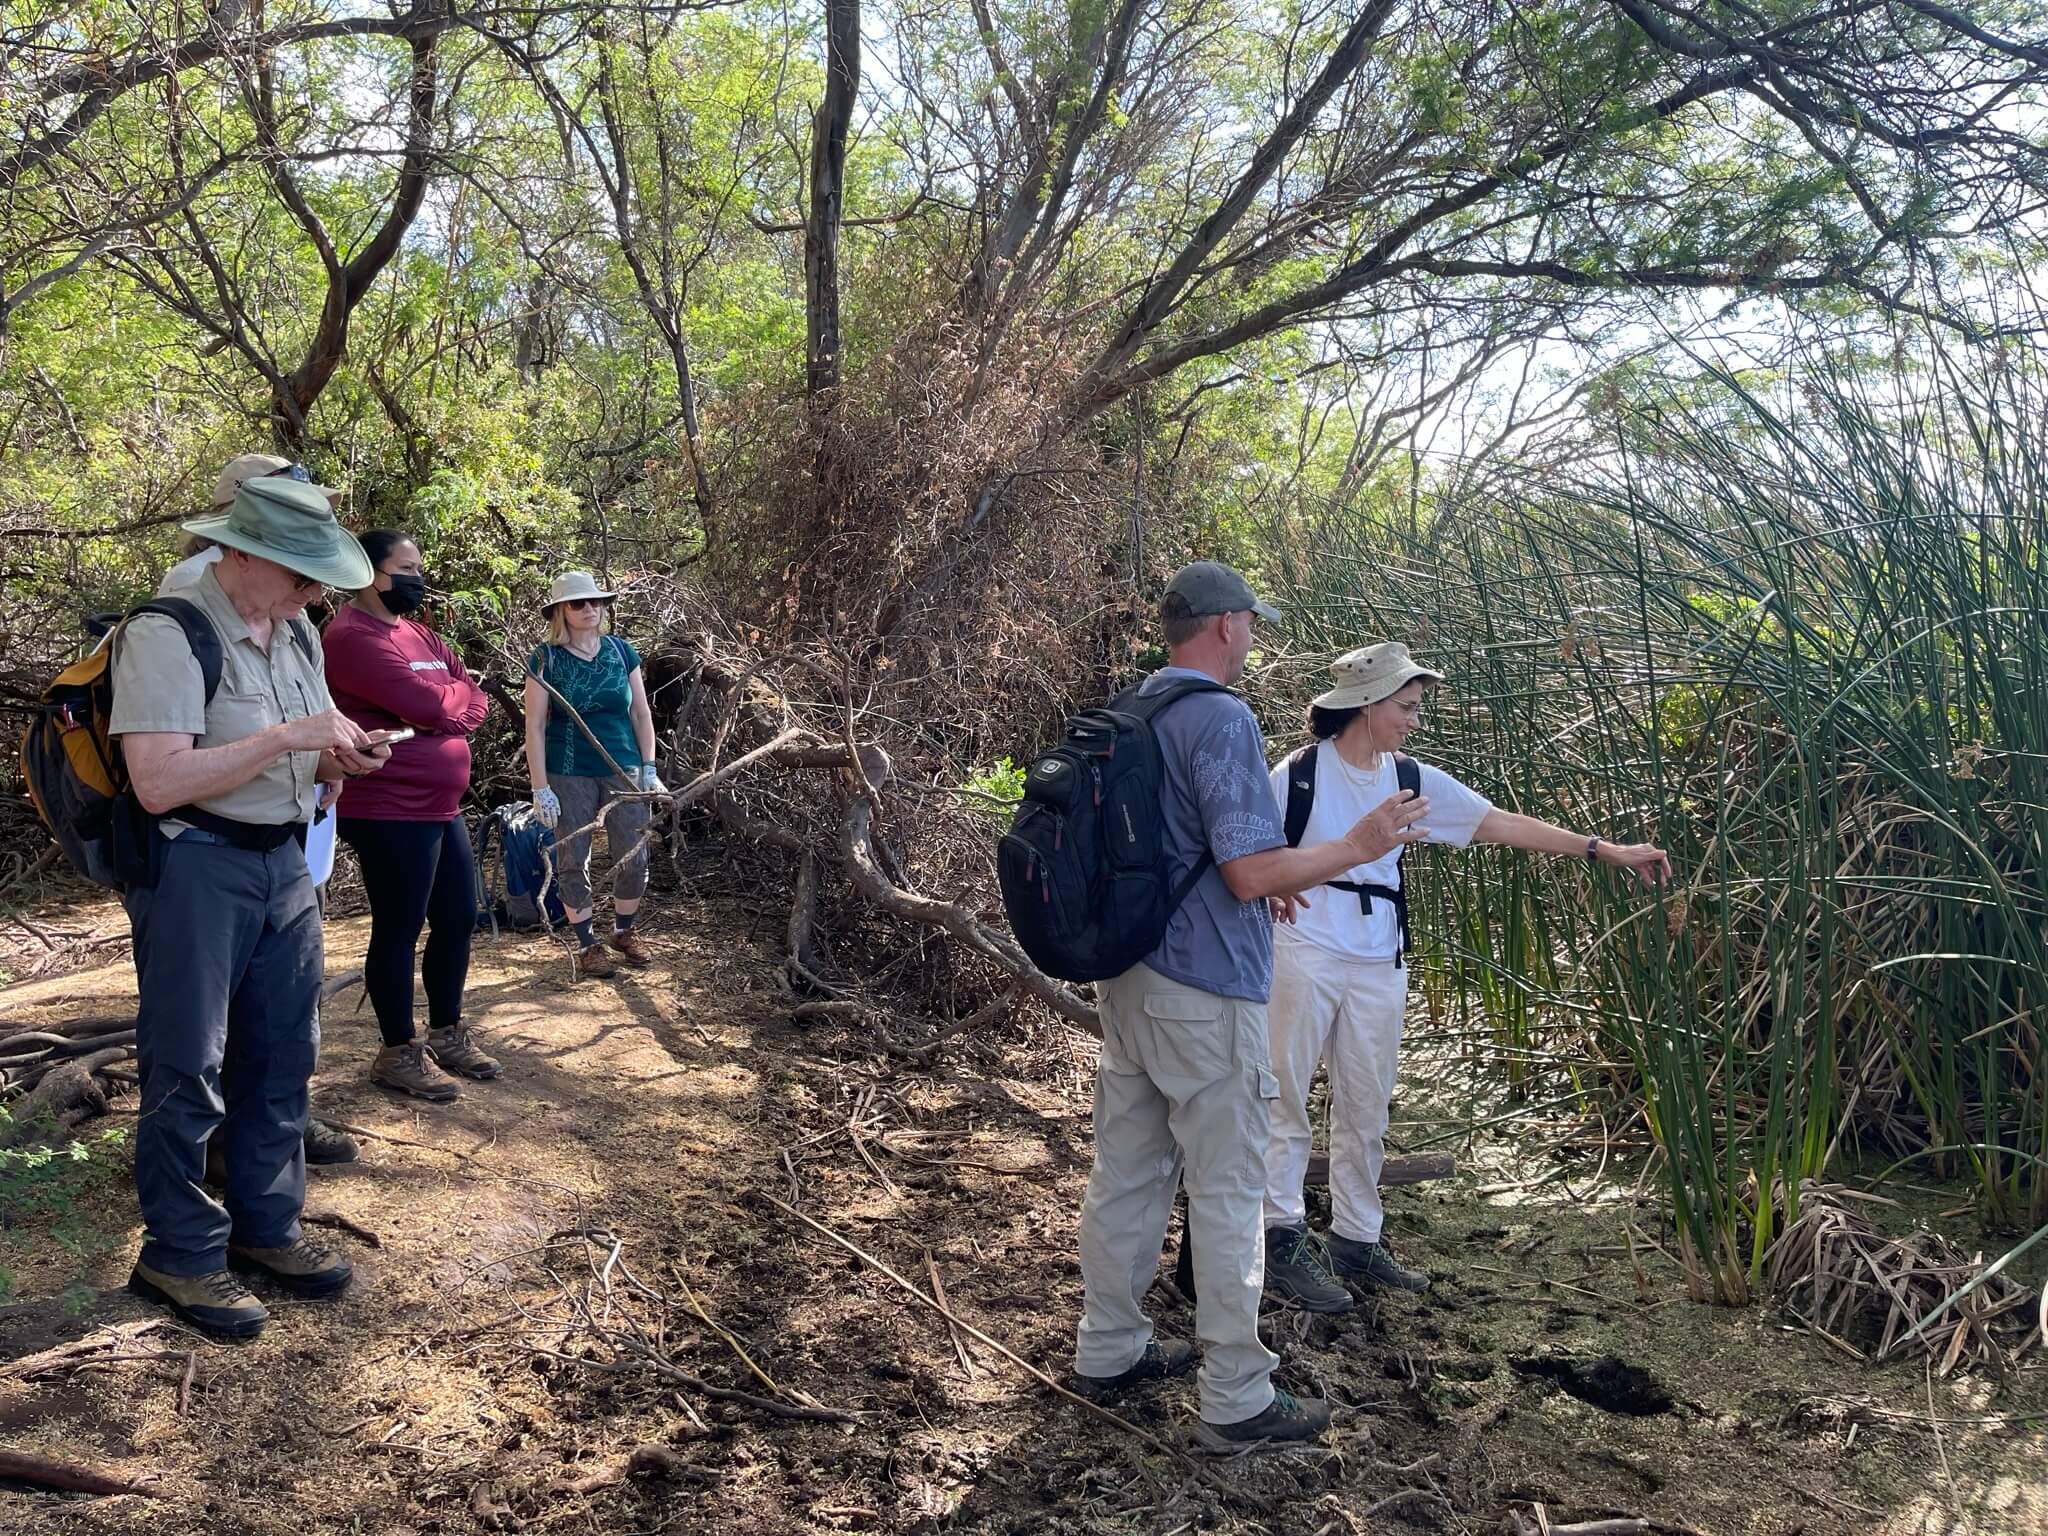 Molokaʻi Wetland Partnership team on site at Kākahaiʻa National Wildlife Refuge, one of the sites that will benefit from the NFWF NCRF grant. Photo: H. Raine